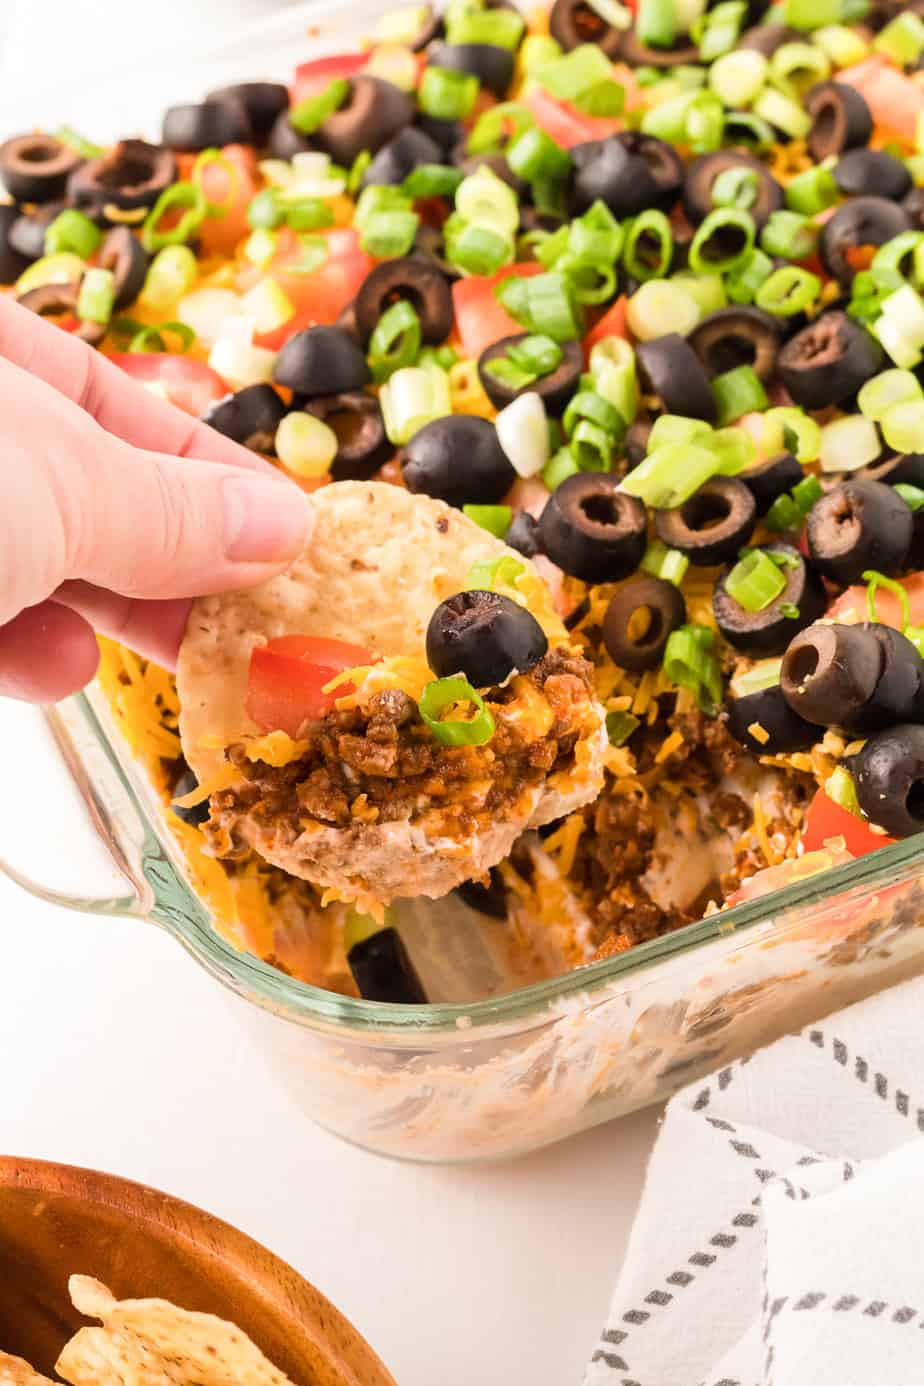 Dipping chip in taco dip with beef from the side.